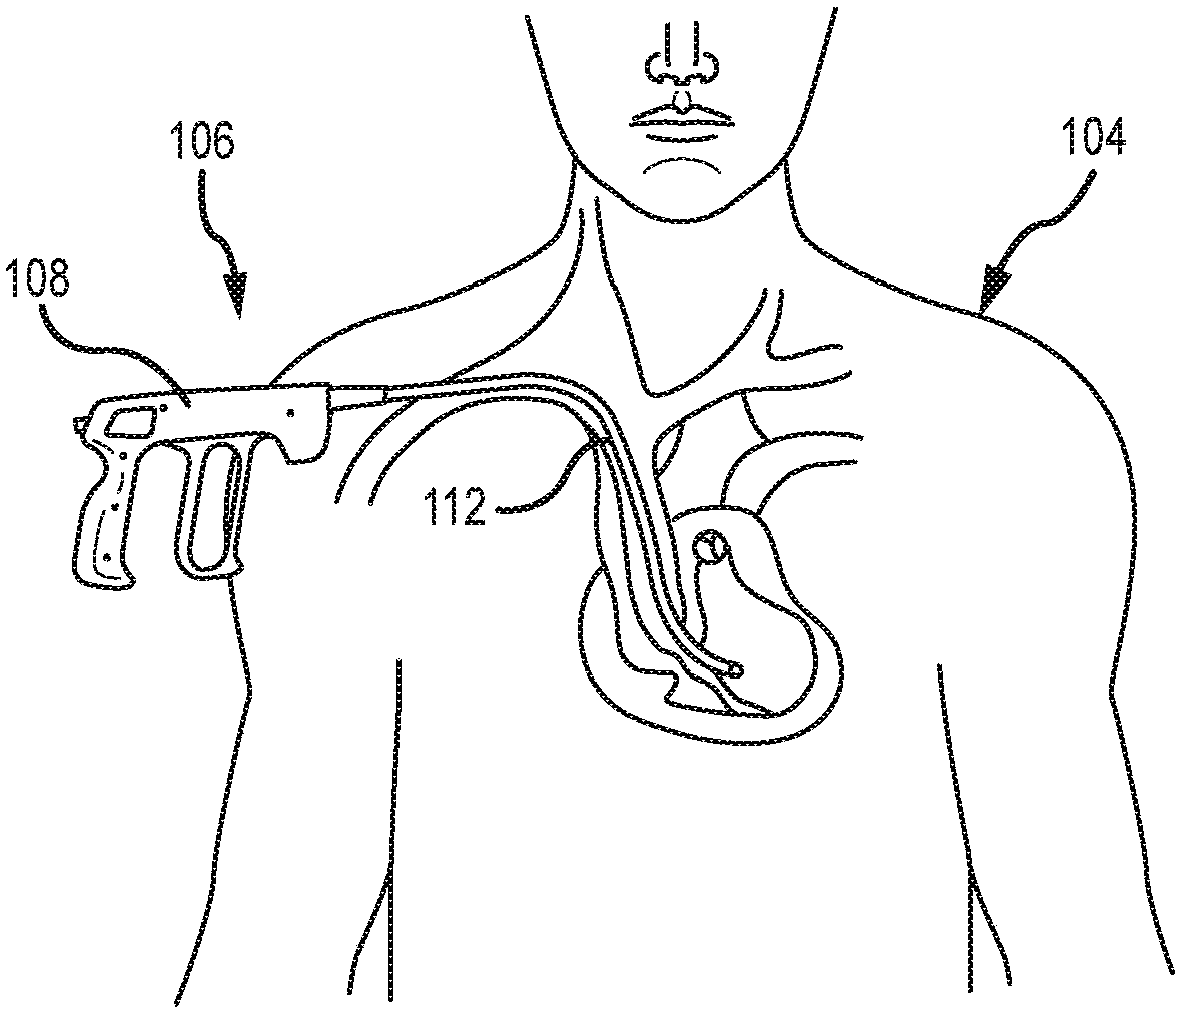 Medical device for removing an implanted object using laser cut hypotubes